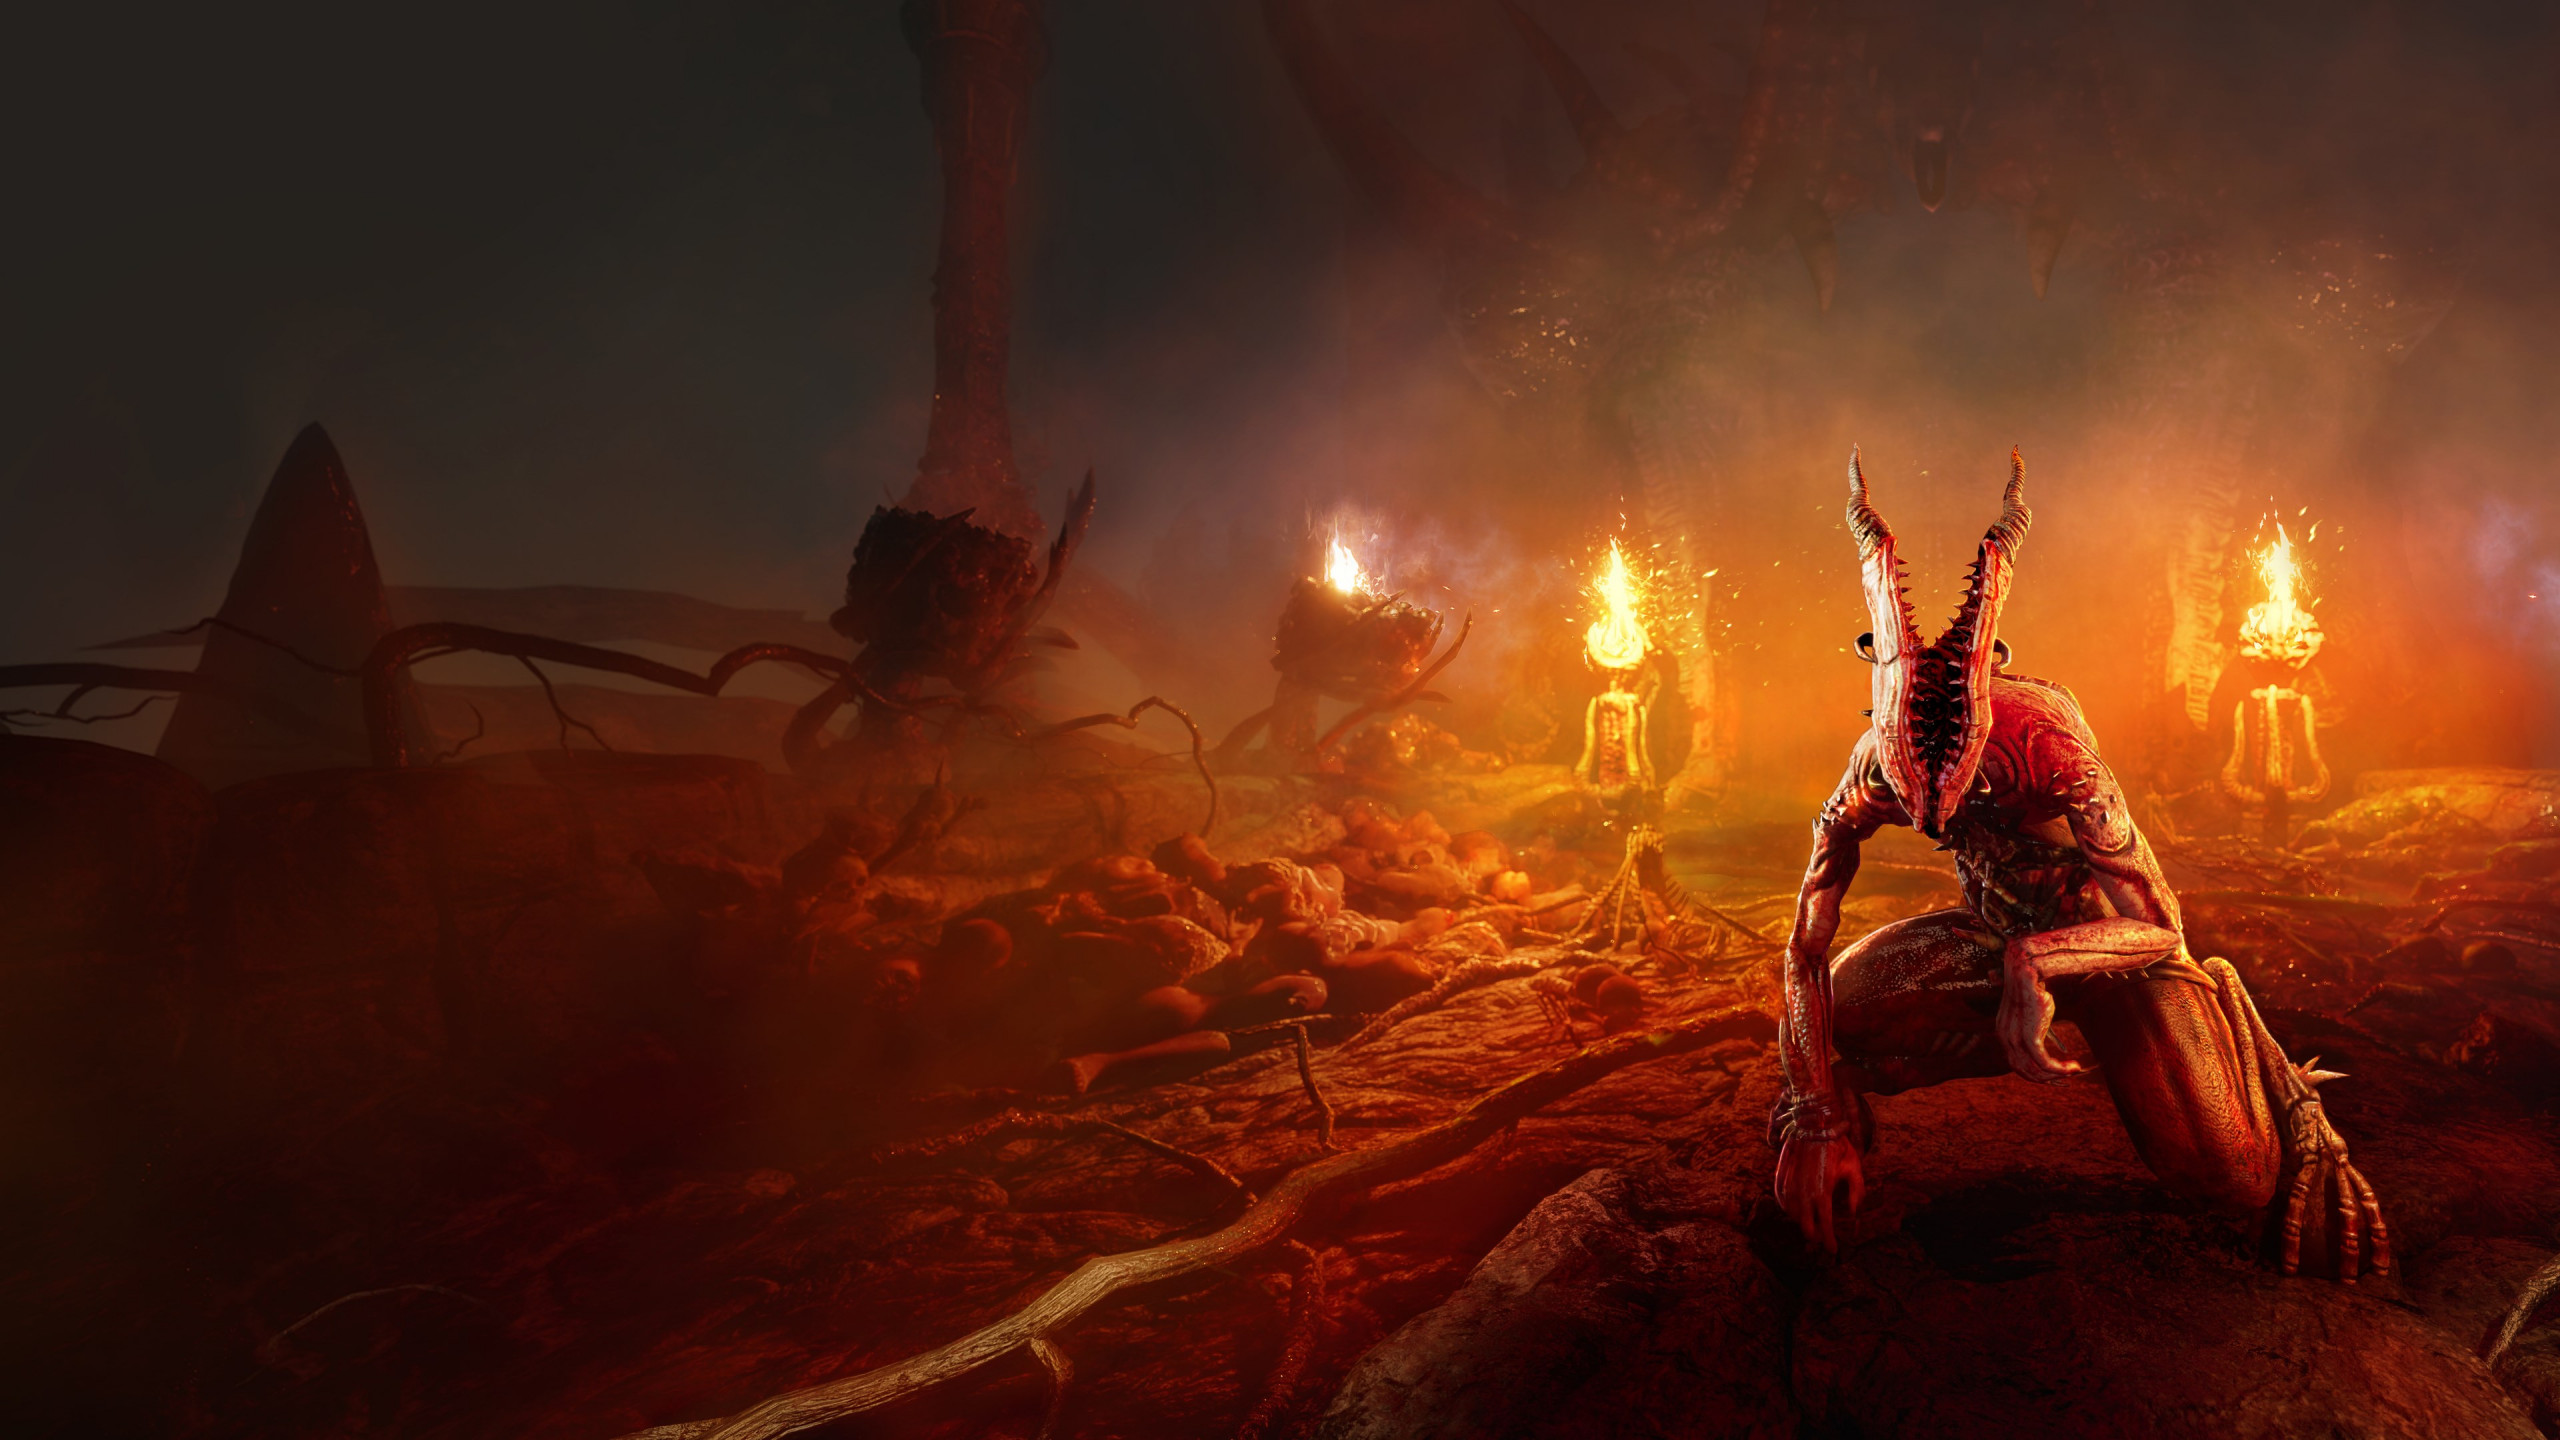 Agony, the video game wallpaper 2560x1440